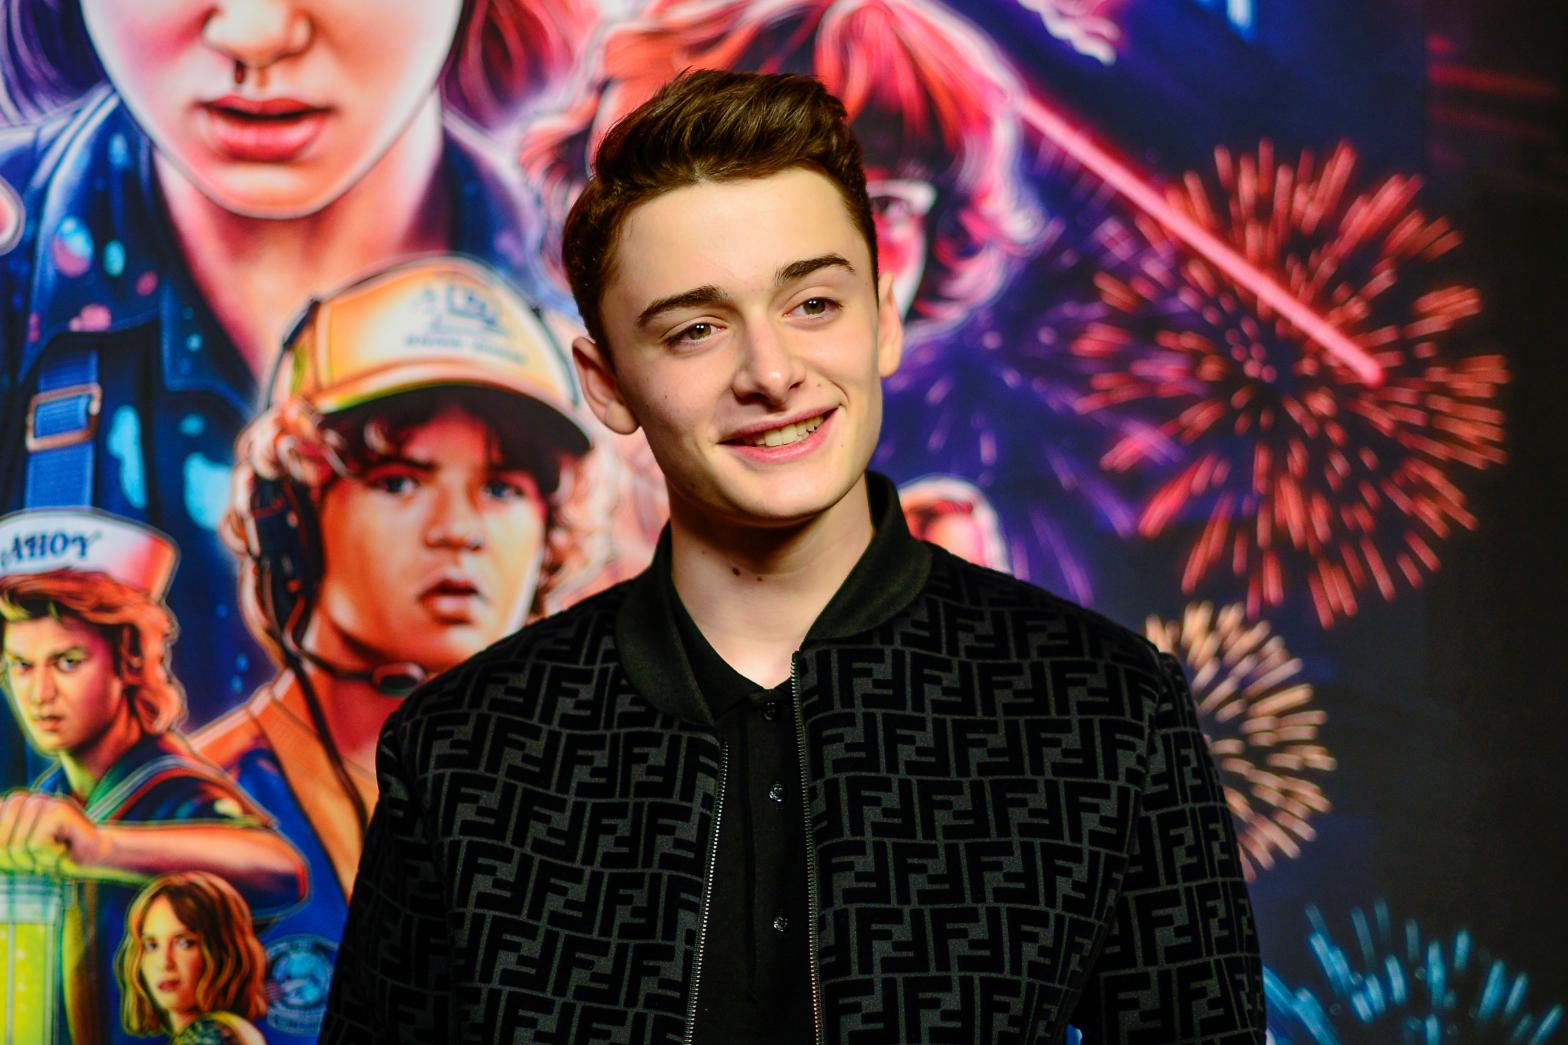 Stranger Things Star Noah Schnapp Is Under Fire After Fans Accuse Him Of Singing N-Word